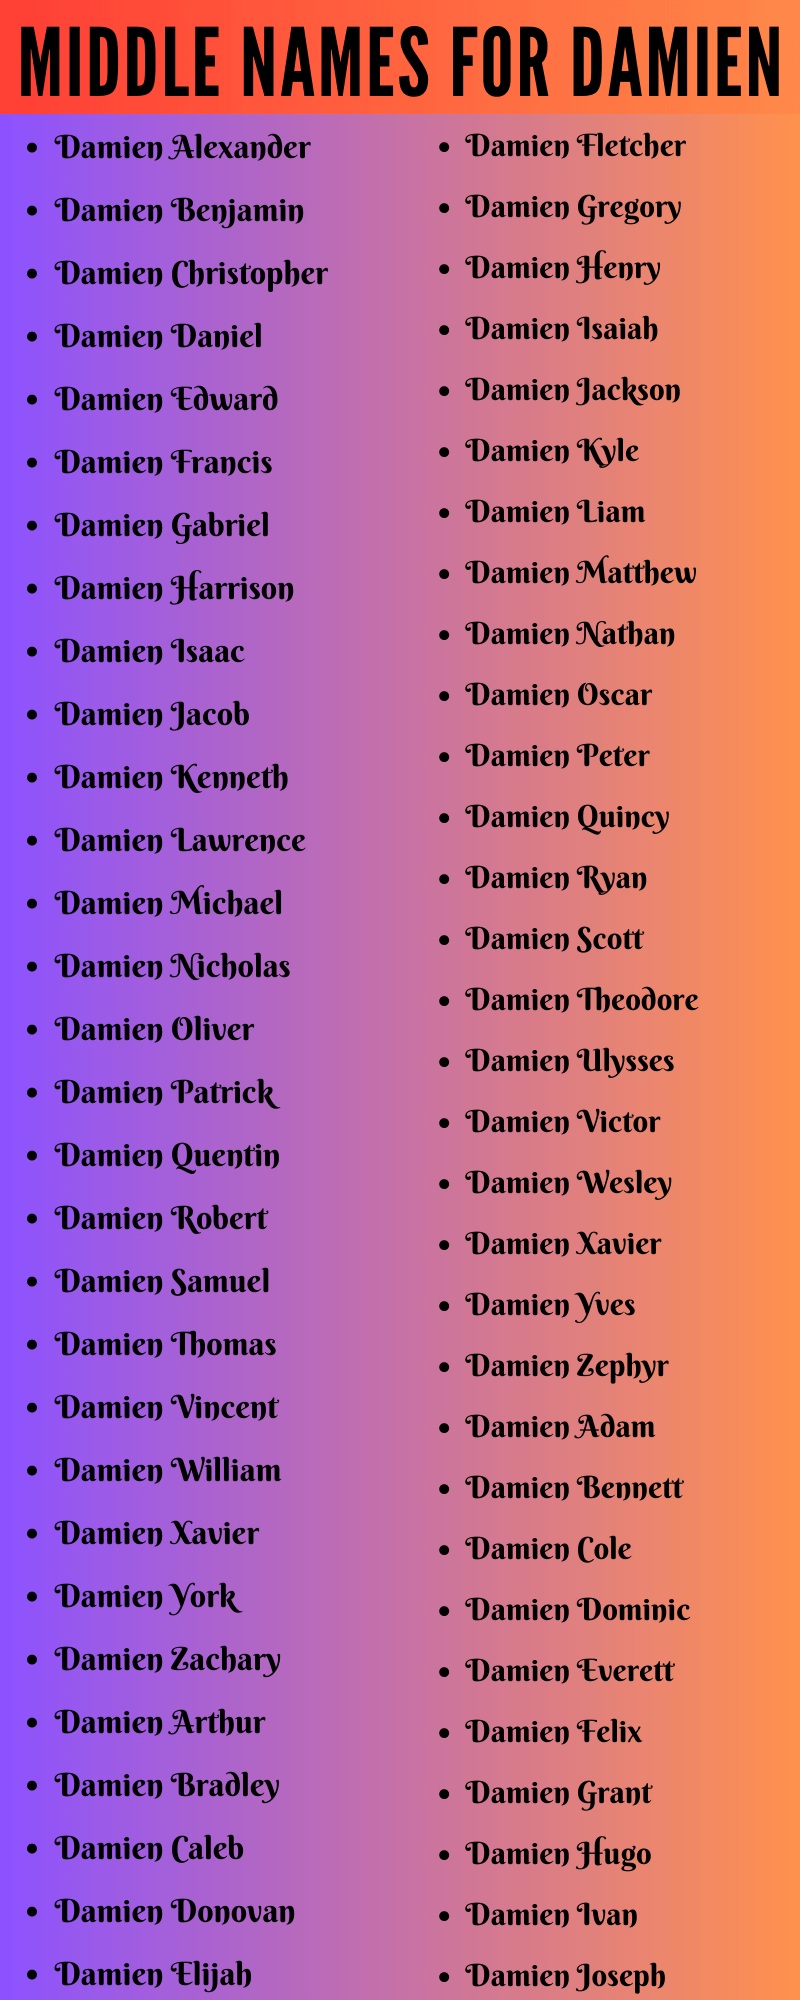 400 Creative Middle Names For Damien